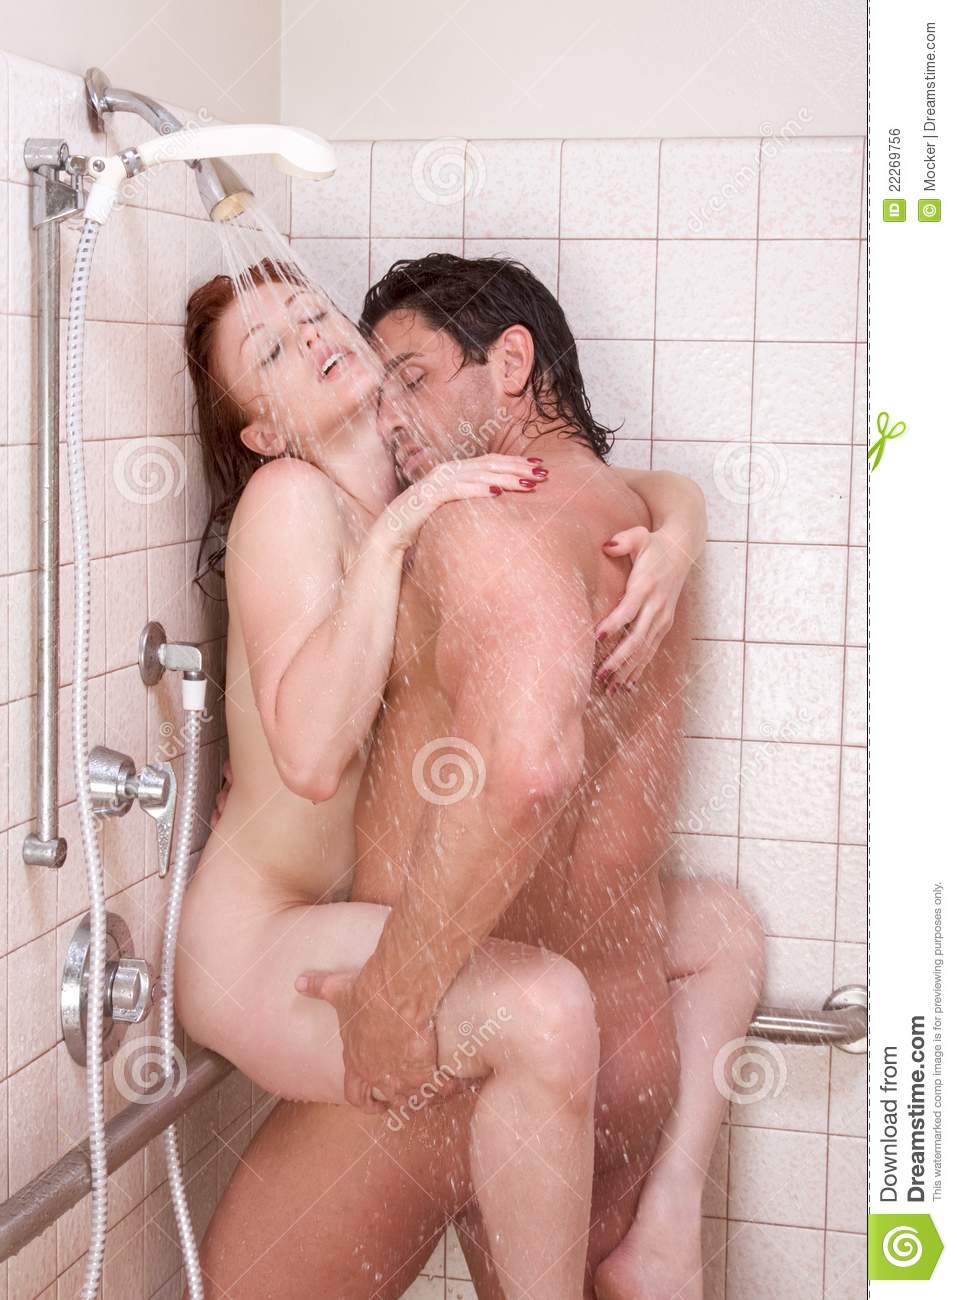 man and woman having sex in shower